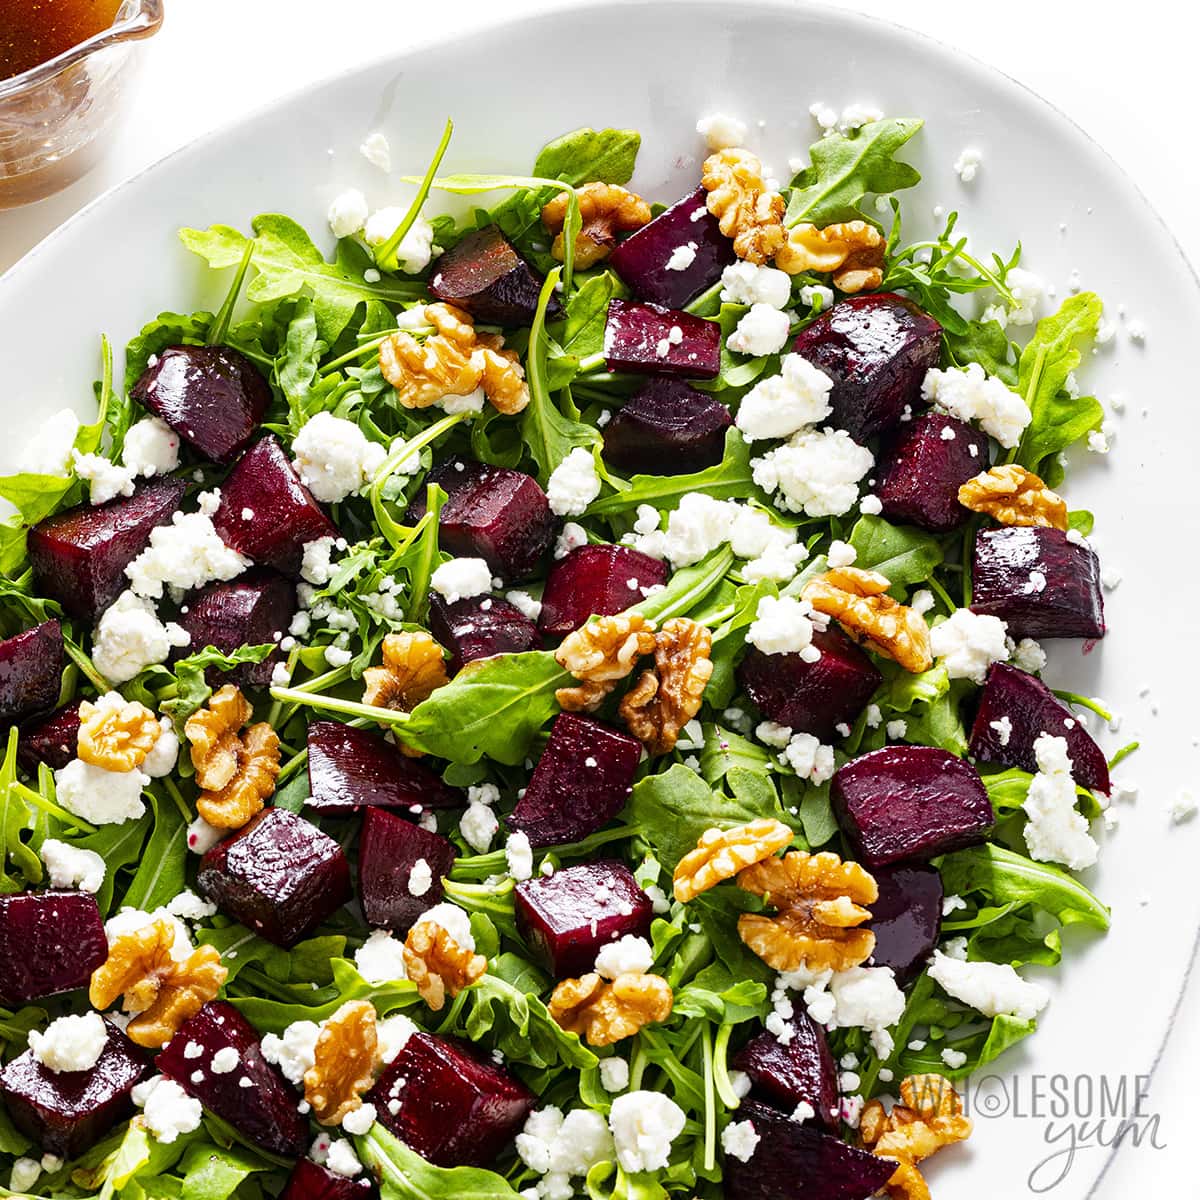 Roasted beet salad with goat cheese and walnuts.